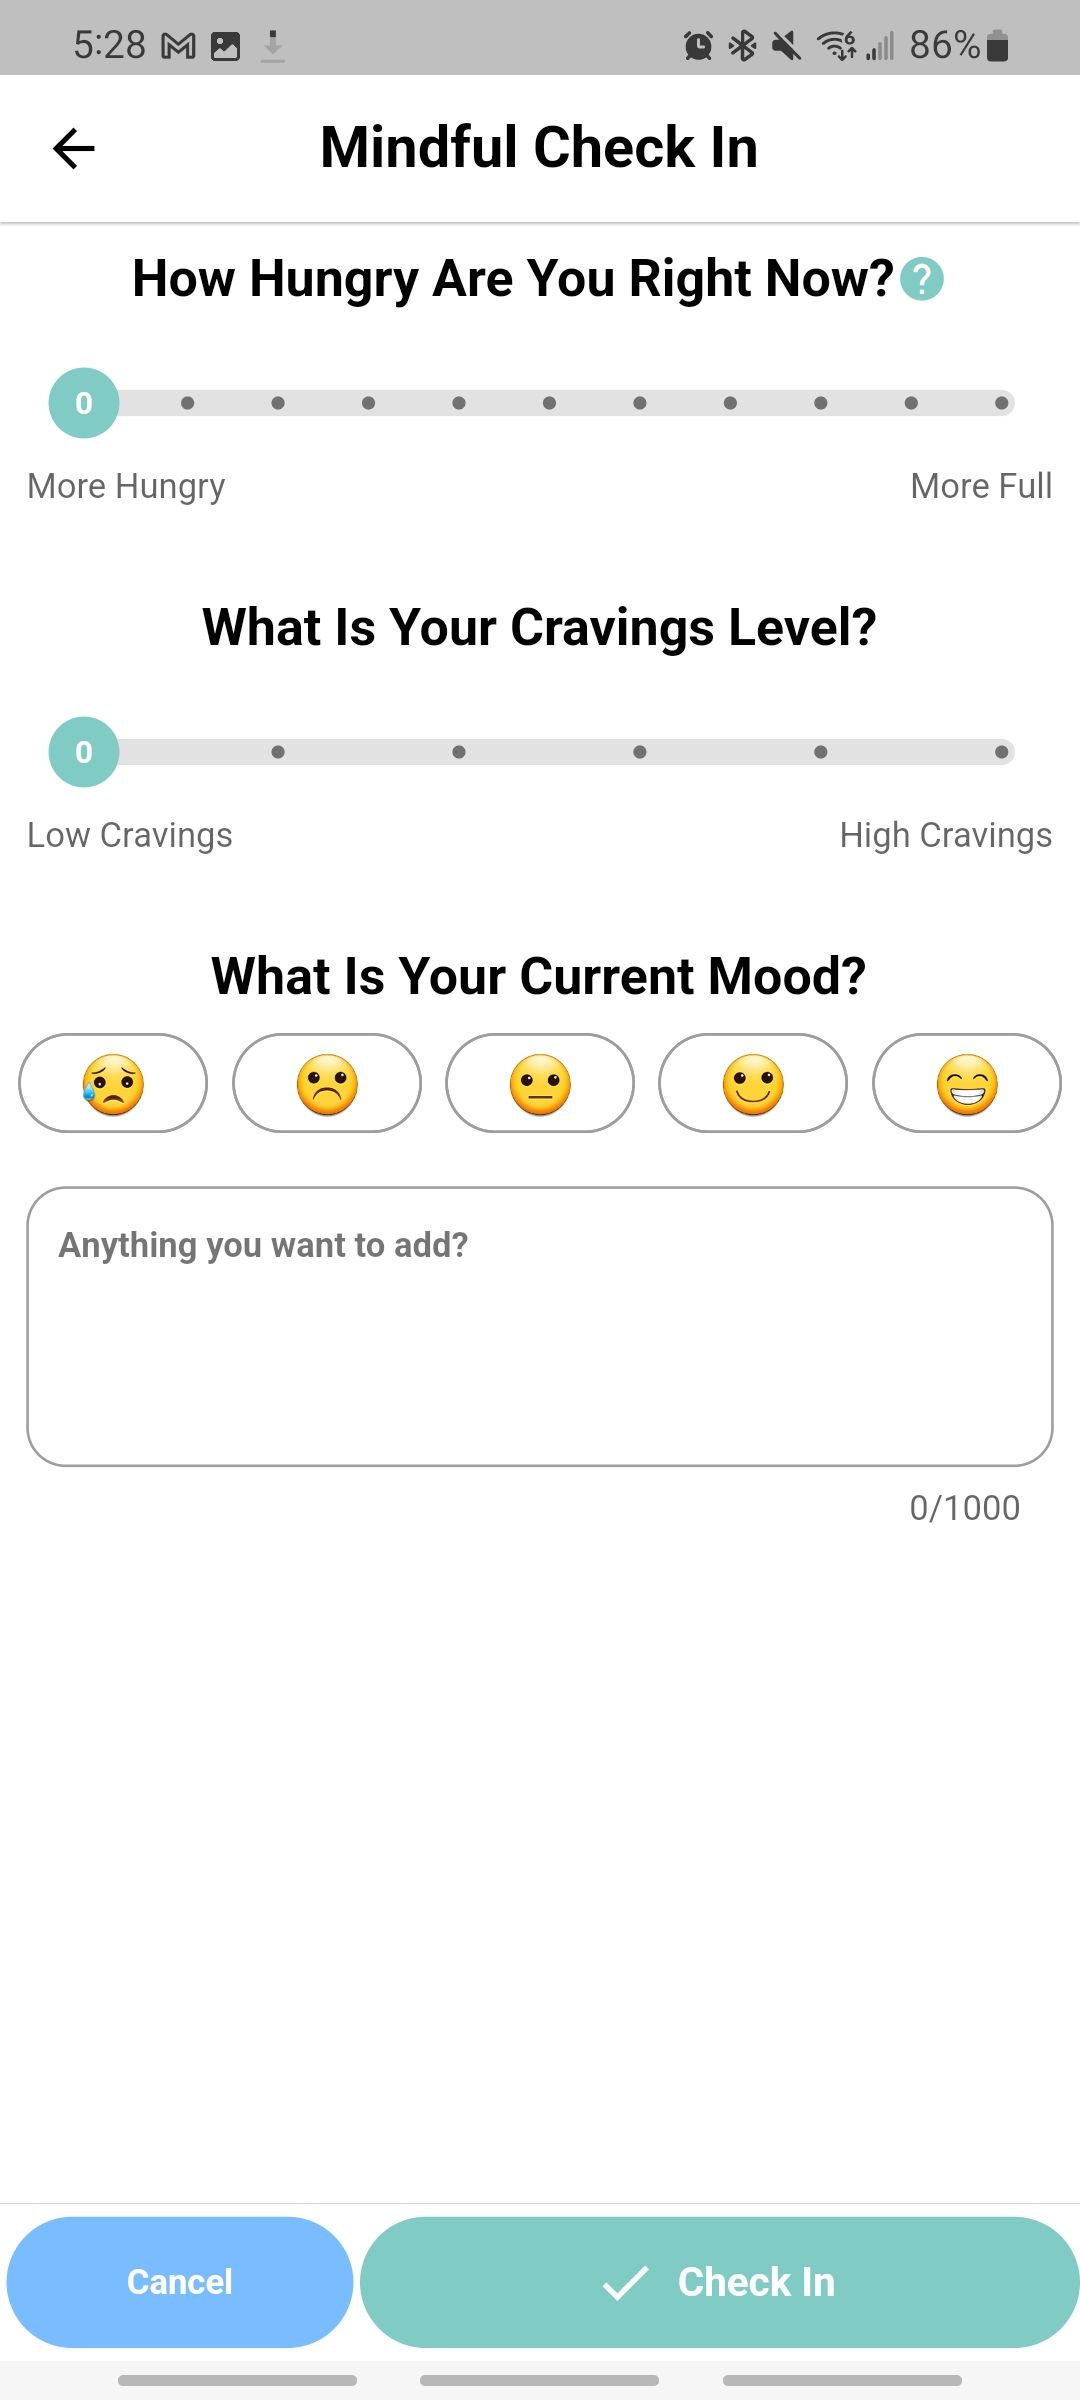 shutterbite app check in to see how hungry you are, your cravings level, and current mood